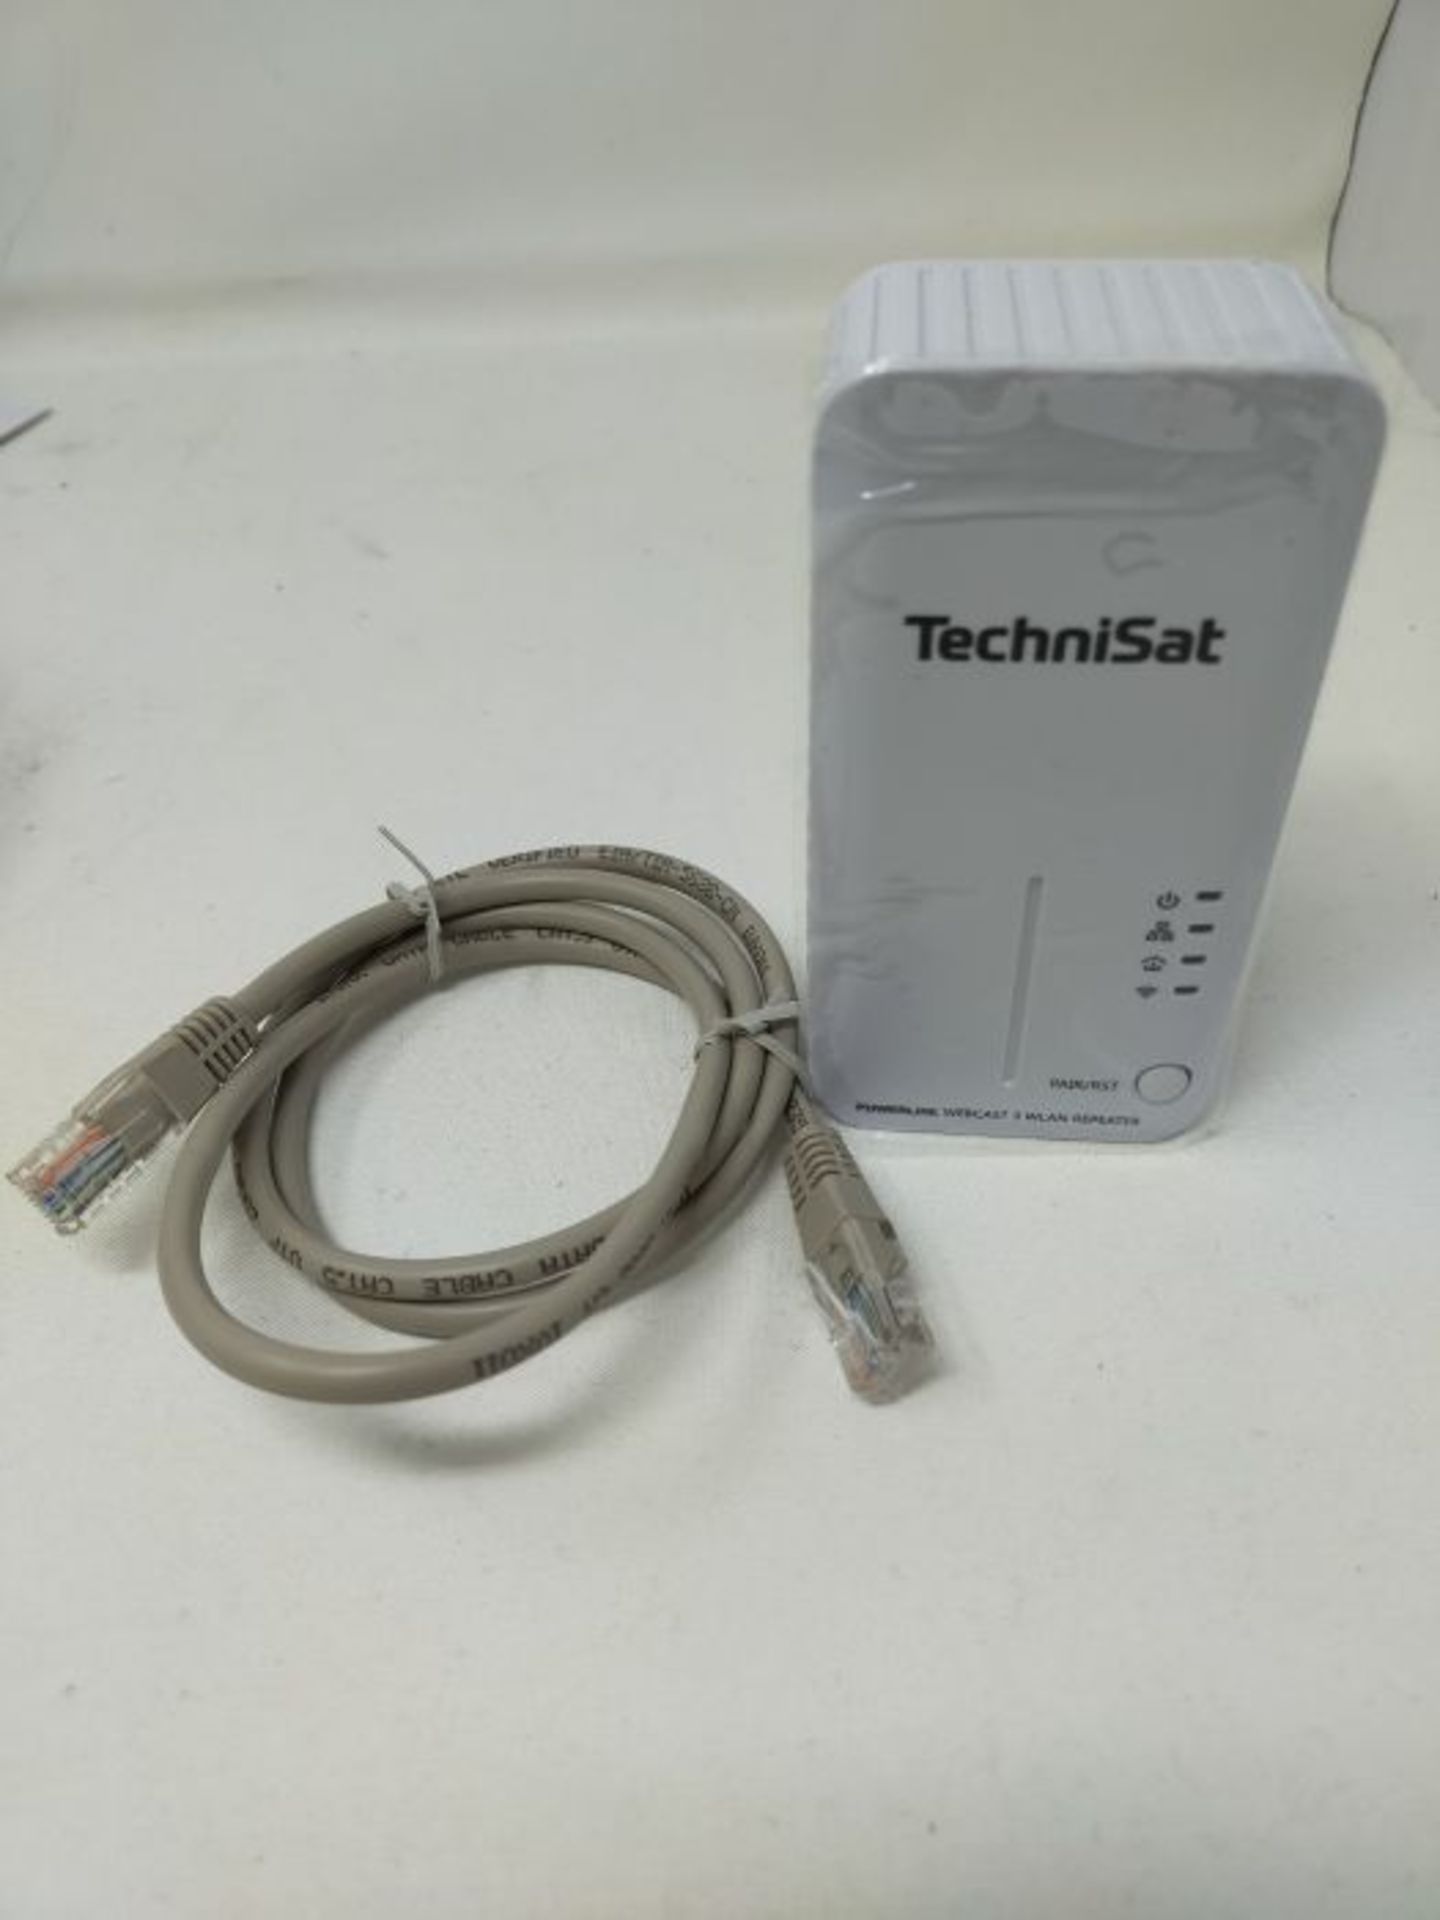 TechniSat Powerline WebCast 3 WLAN Repeater (to extend the range of existing WLAN netw - Image 2 of 2